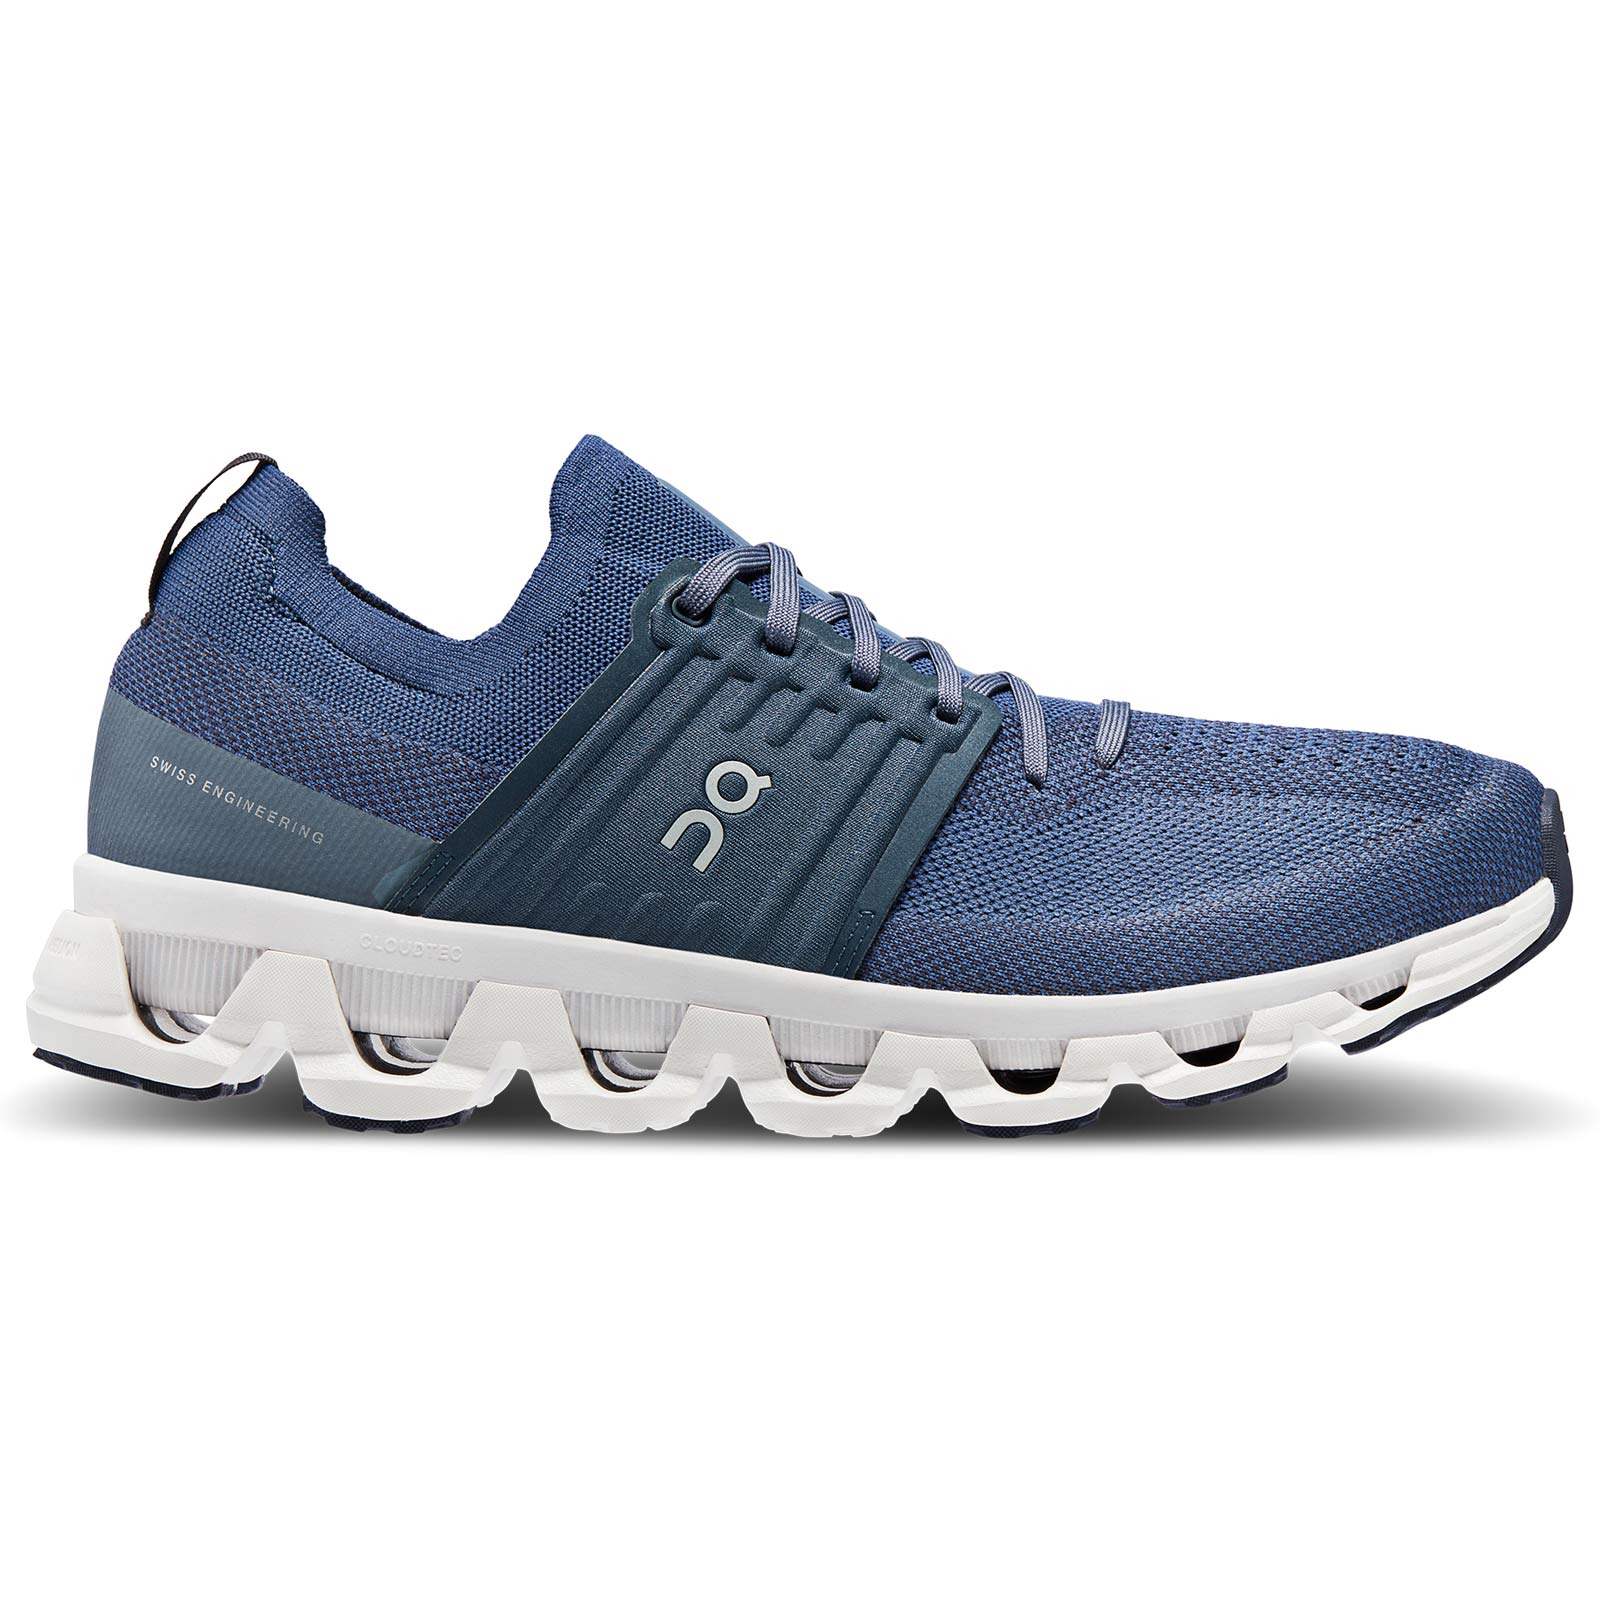 ON CLOUDSWIFT 3 MENS RUNNING SHOES